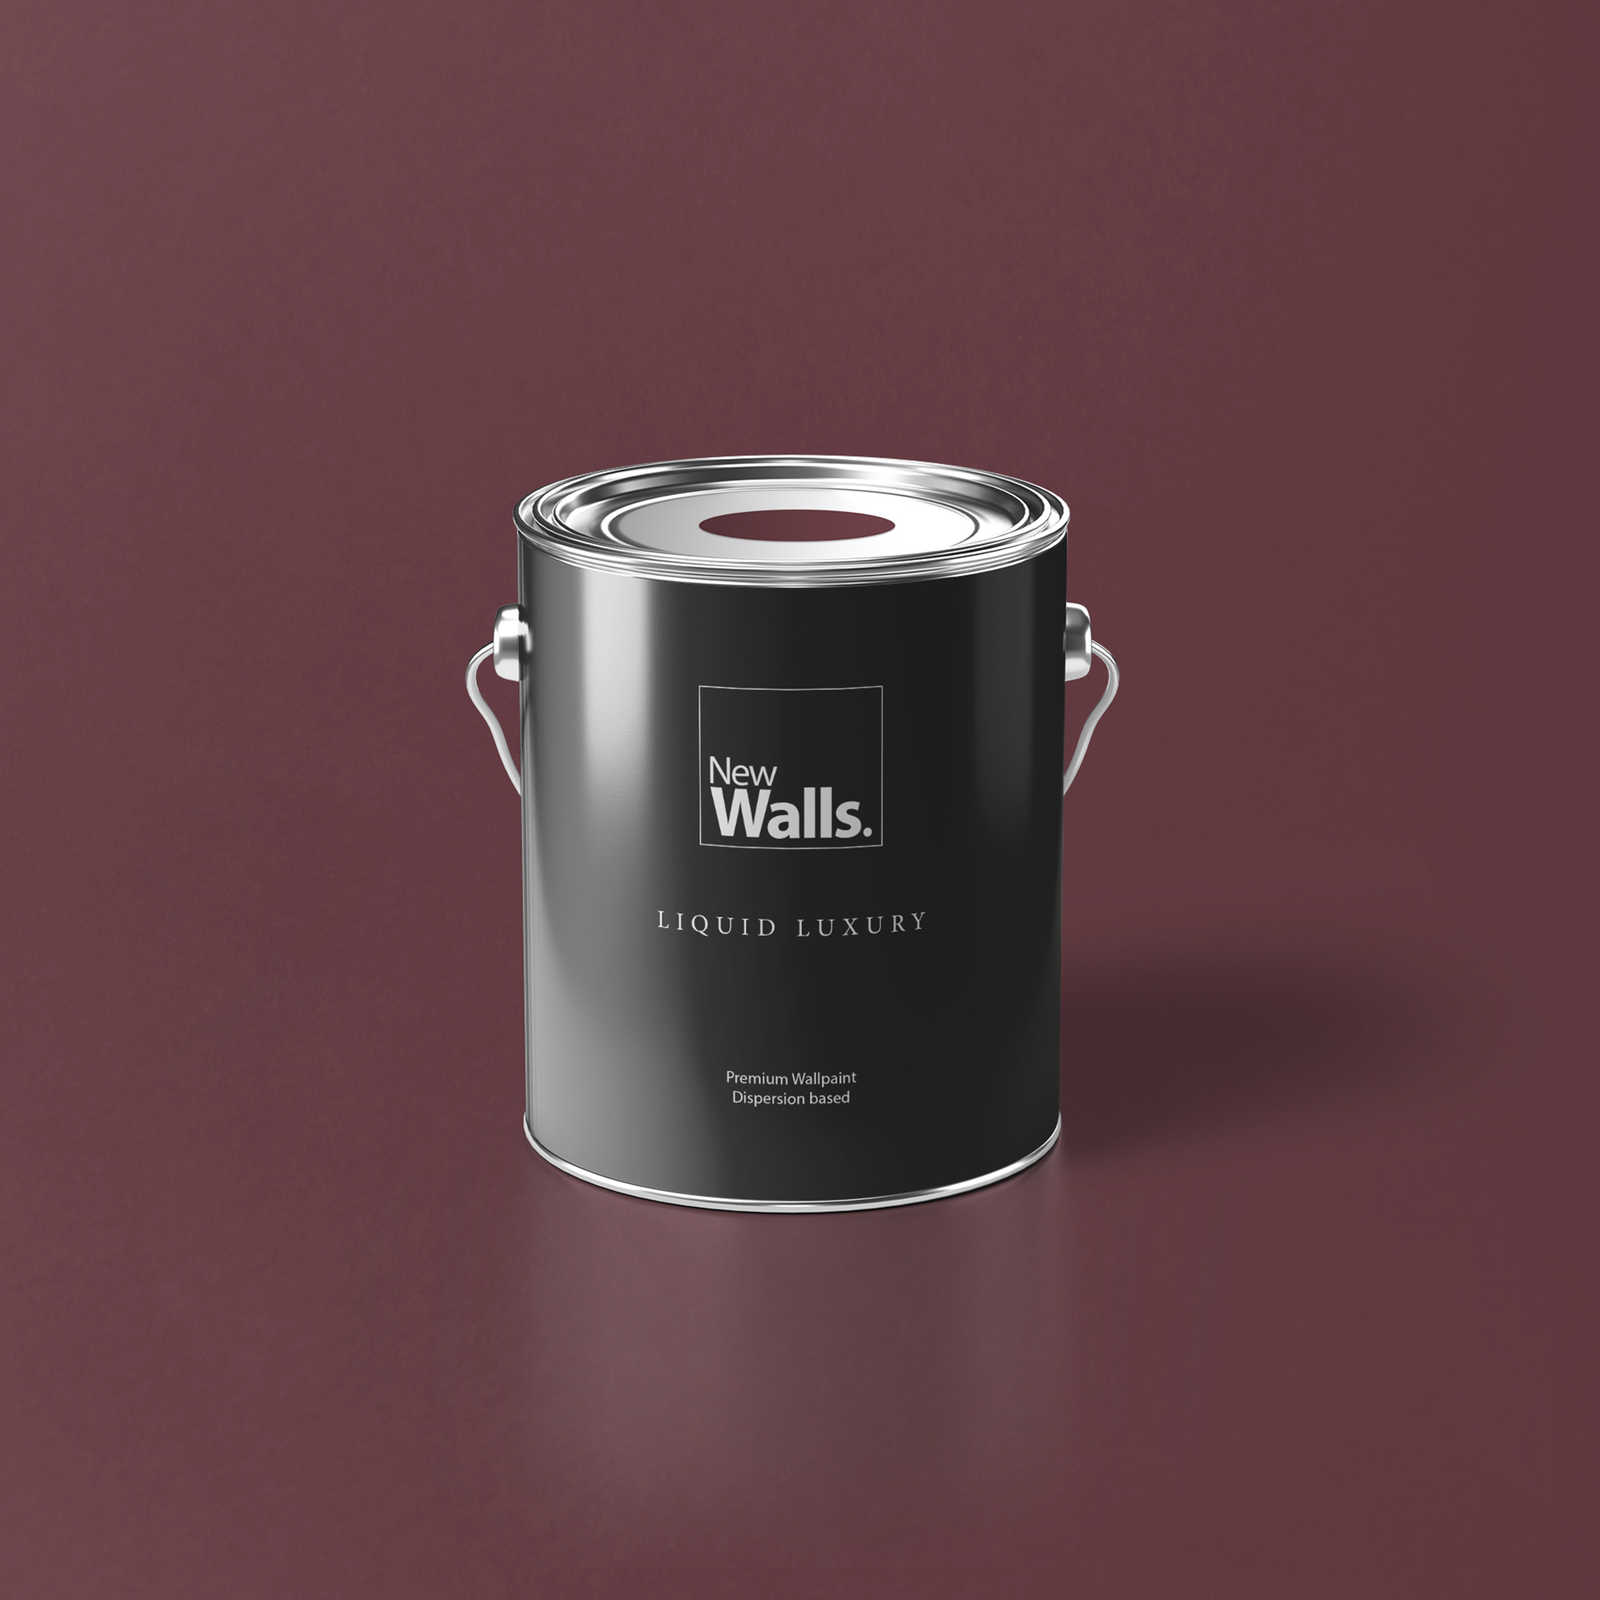 Premium Wall Paint gorgeous Bordeaux red »Beautiful Berry« NW213 – 2.5 litre
